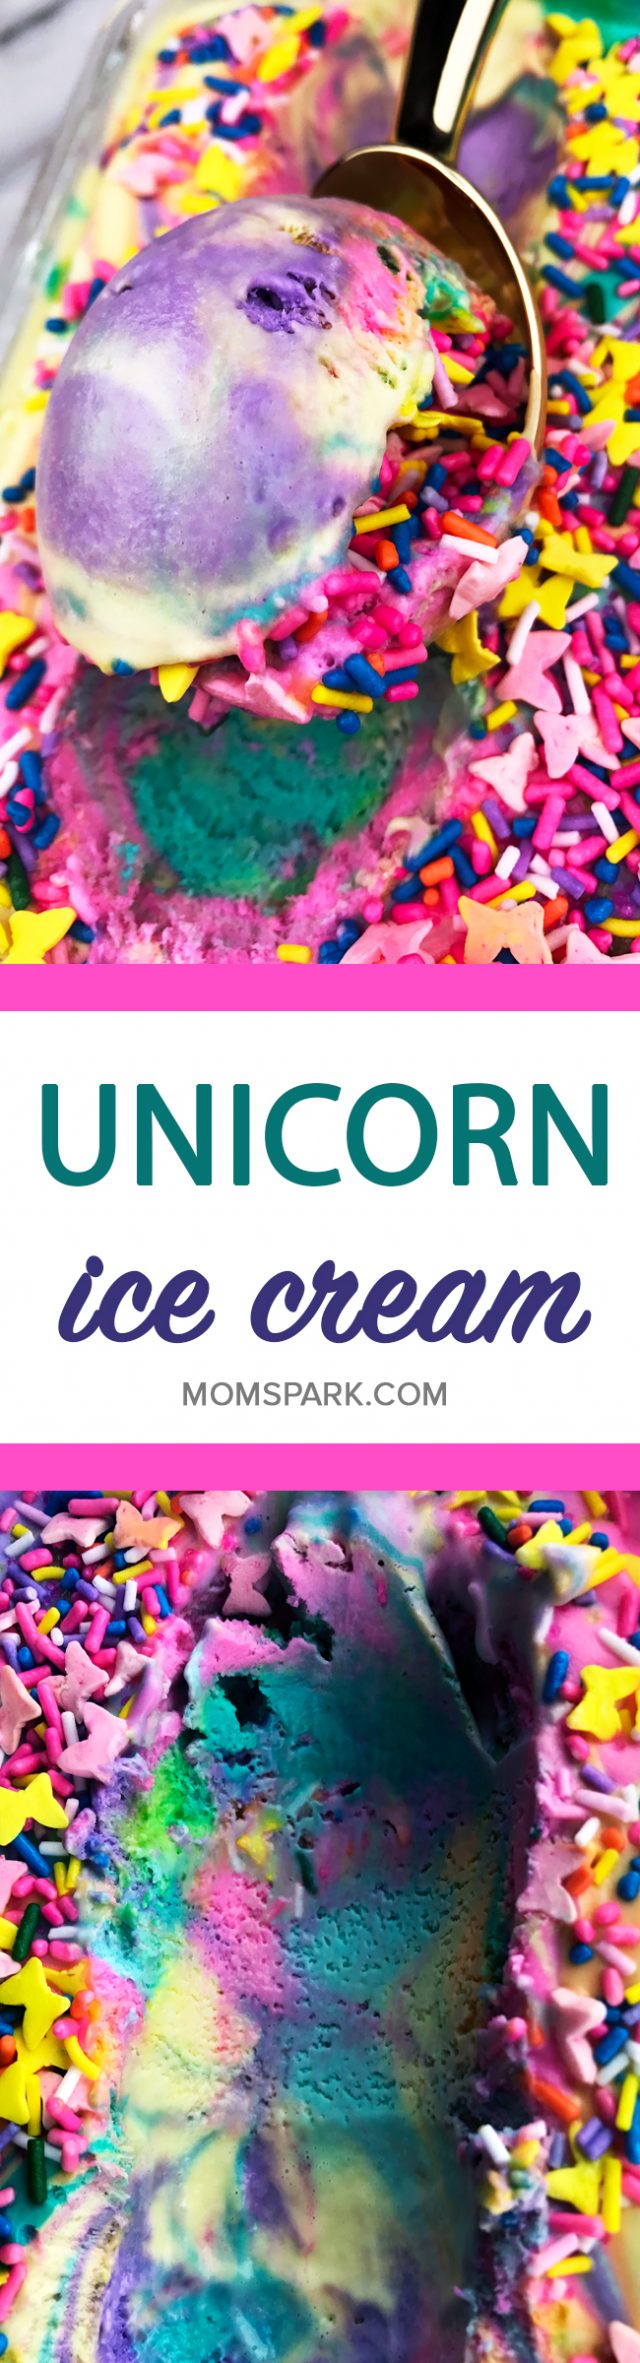 Rainbow Unicorn Ice Cream Recipe - Unicorns may be imaginary magical creatures, but we're still ready to celebrate them. Today's recipe does just that. It's a mixture of bright rainbow ice cream colors covered in sprinkles. This ice cream recipe is perfect for your next fantasy unicorn party celebration. Or just because it's fun and delicious. Either way. No judgment here.